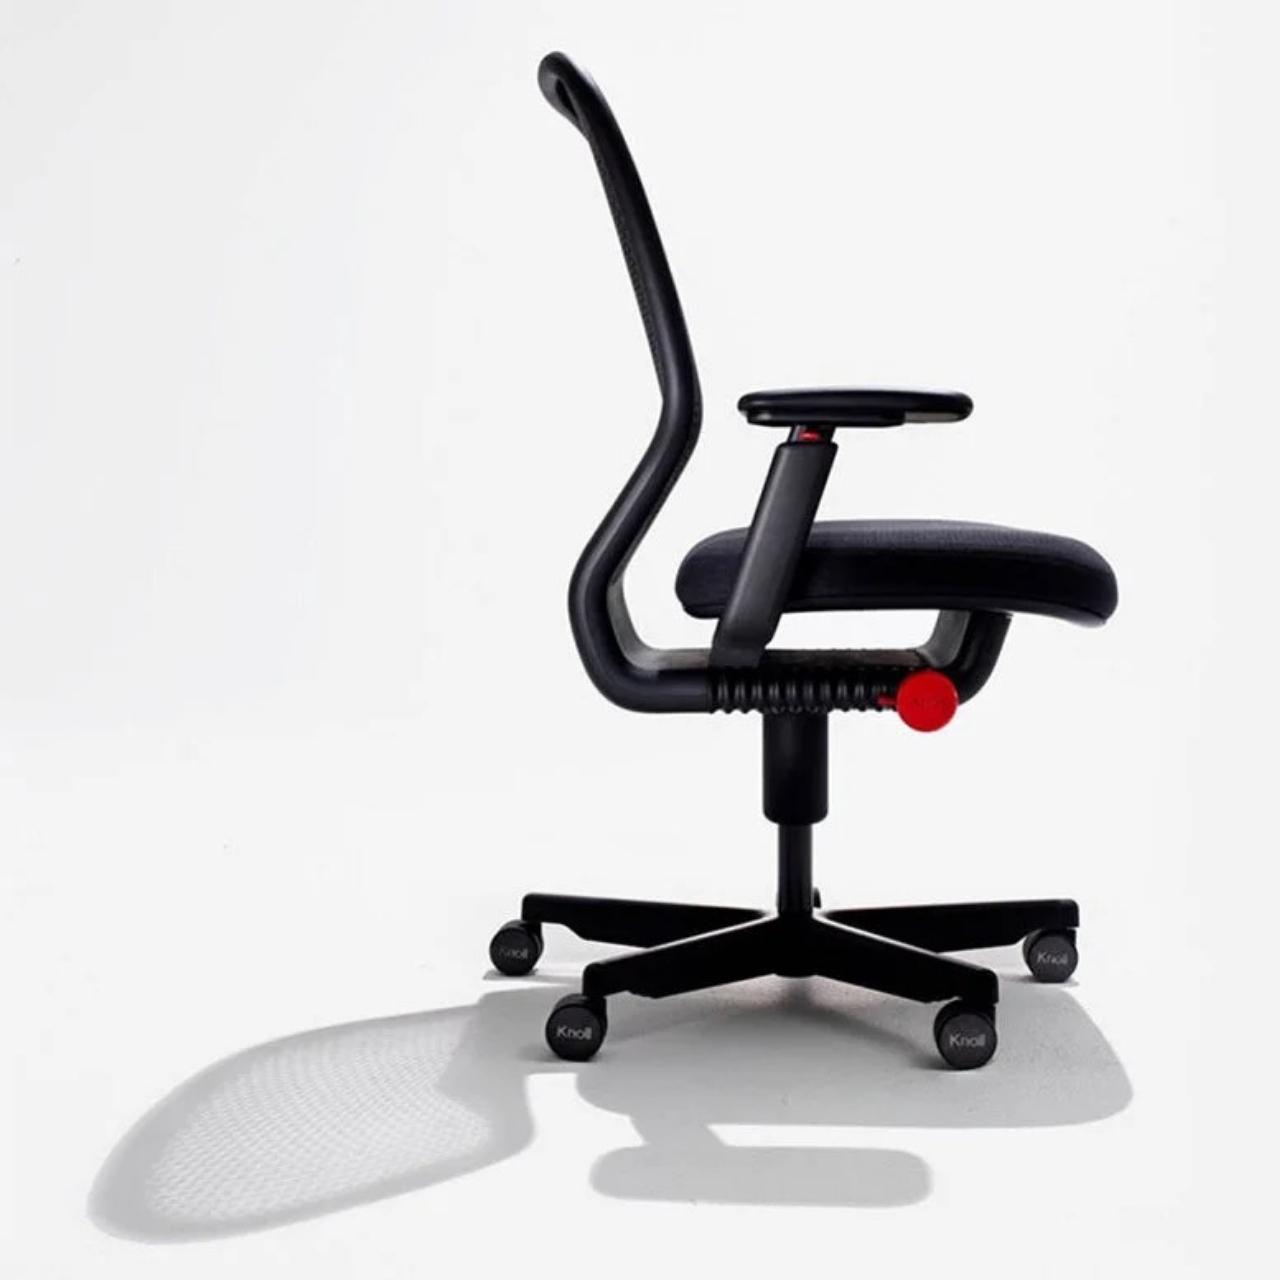 https://www.yankodesign.com/images/design_news/2022/06/task-chair-brings-a-floating-seat-perforated-back-design/3-1.jpg